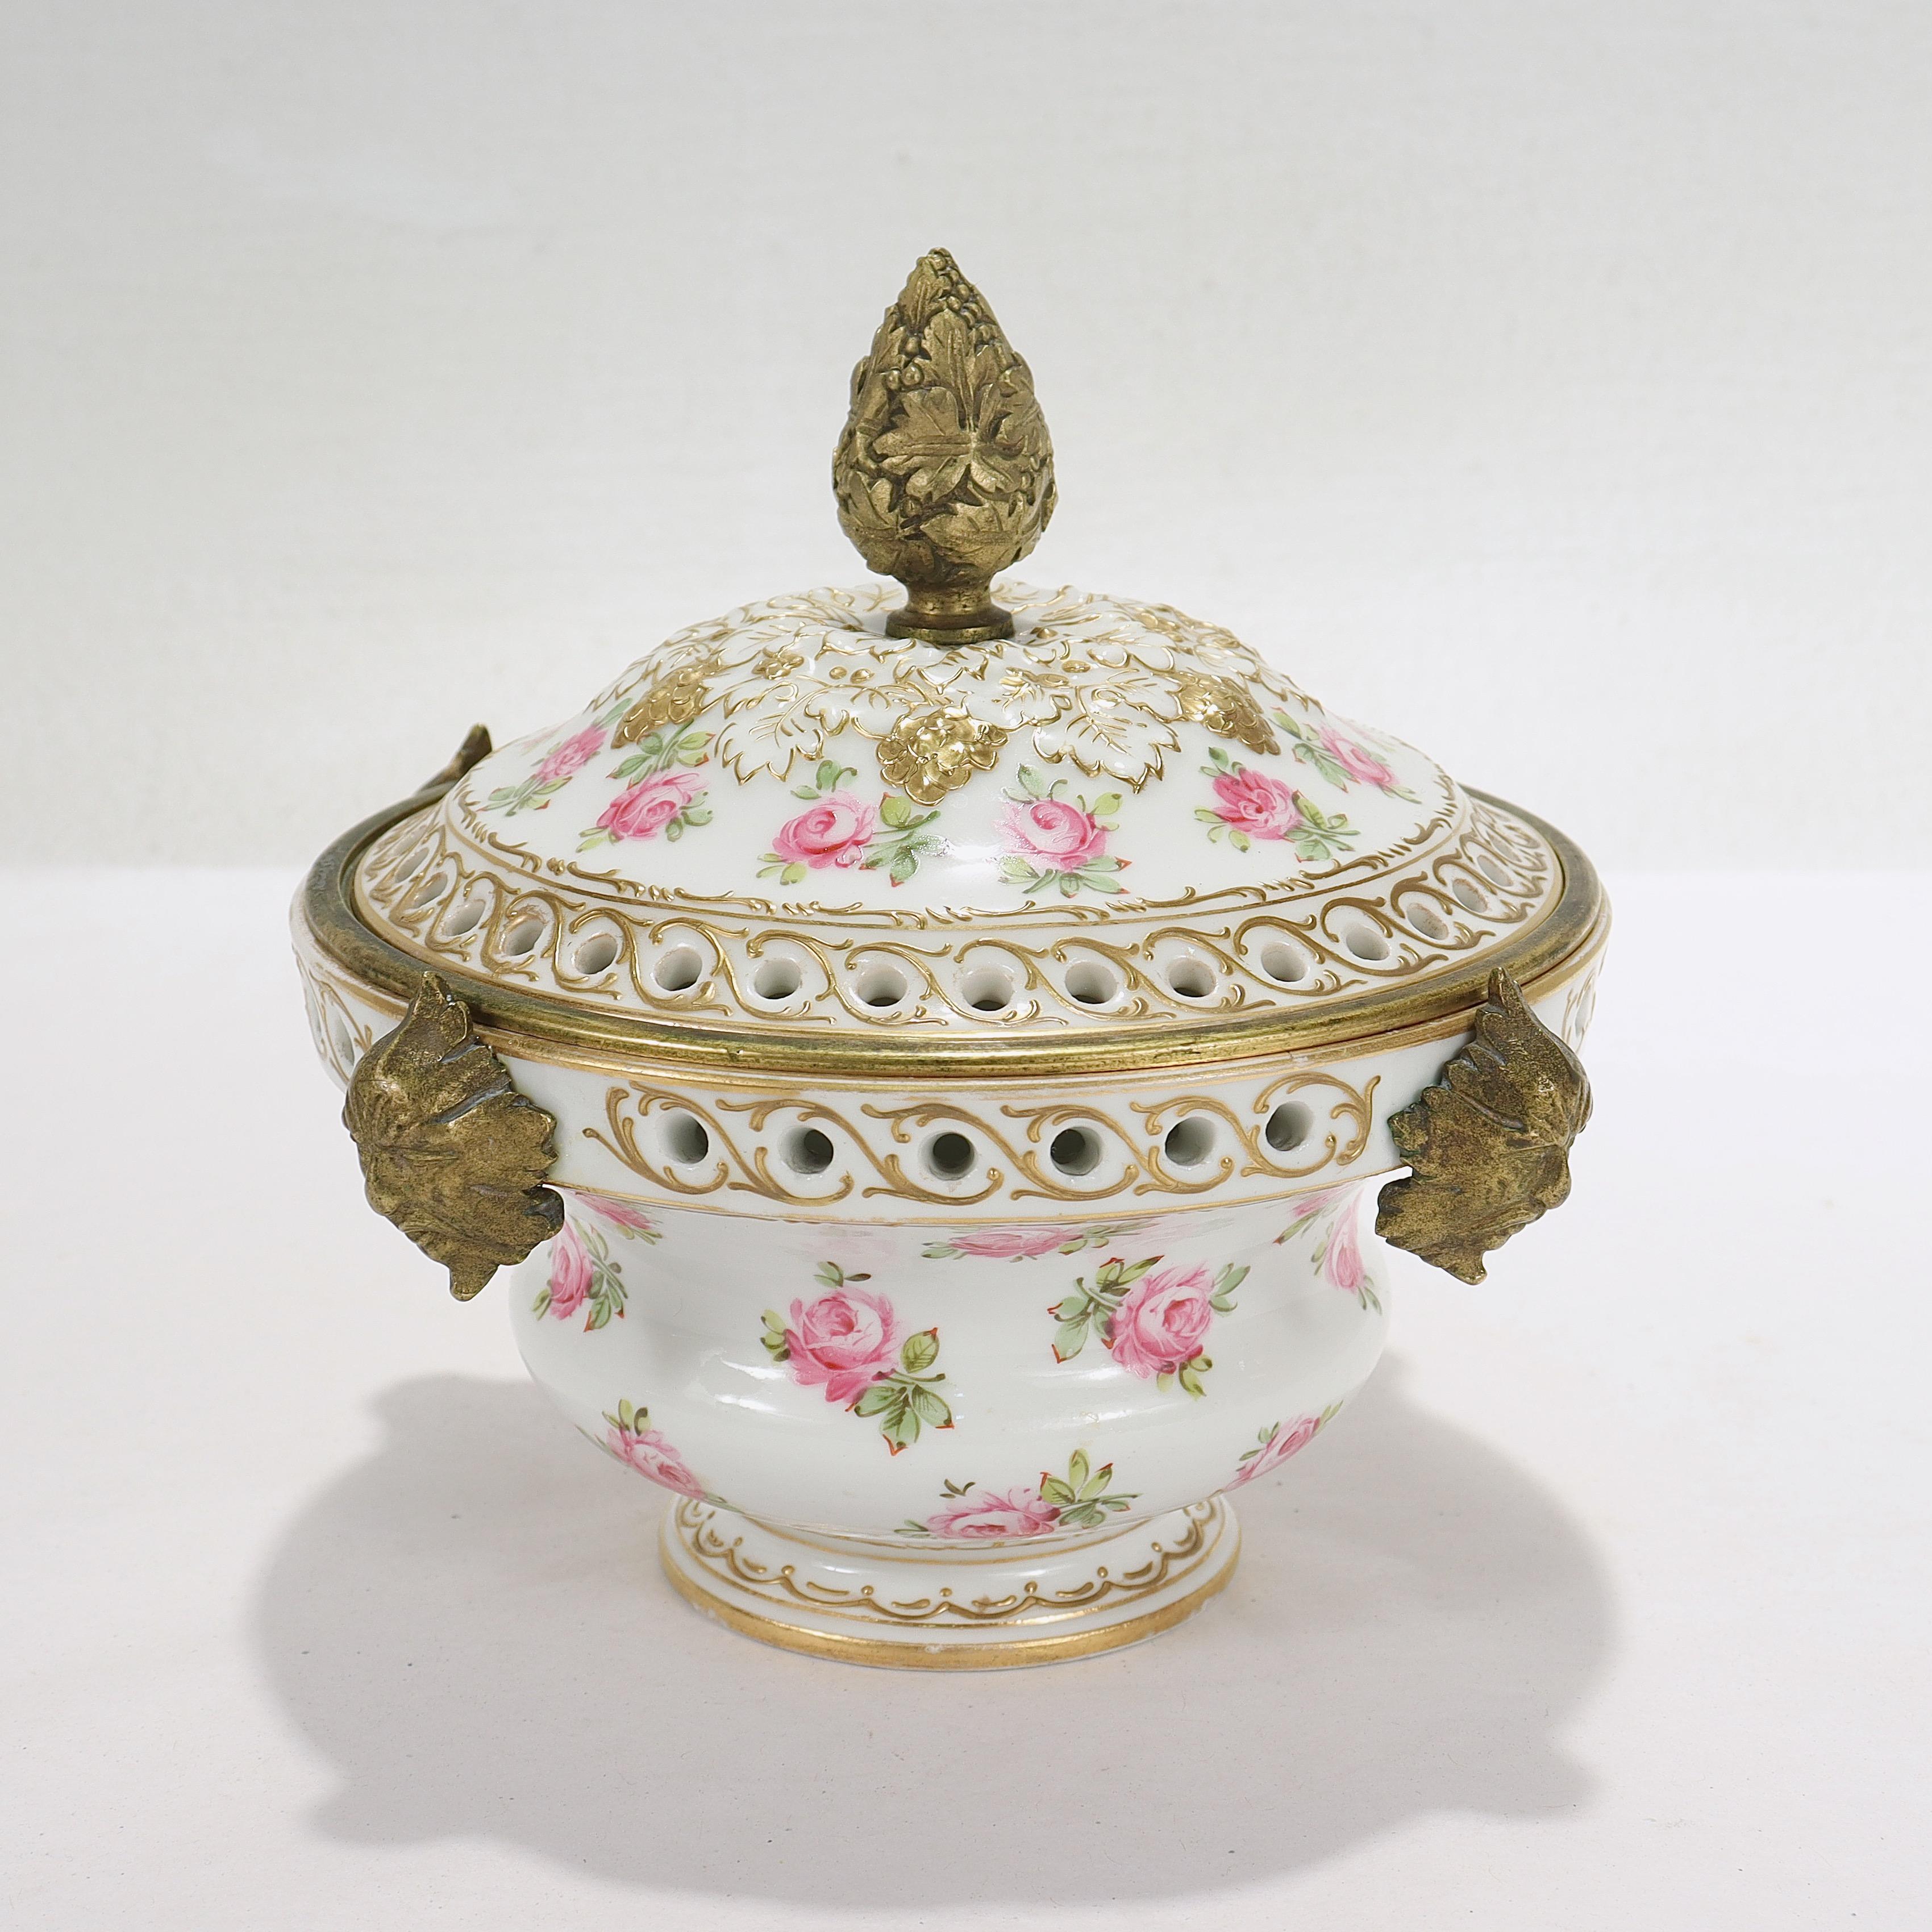 A fine antique French porcelain potpourri cachepot.

In the Sevres style.

Mounted with a bronze finial to the lid, 4 bronze masks to the circumference, and set with a removable bronze ring to the interior lip.